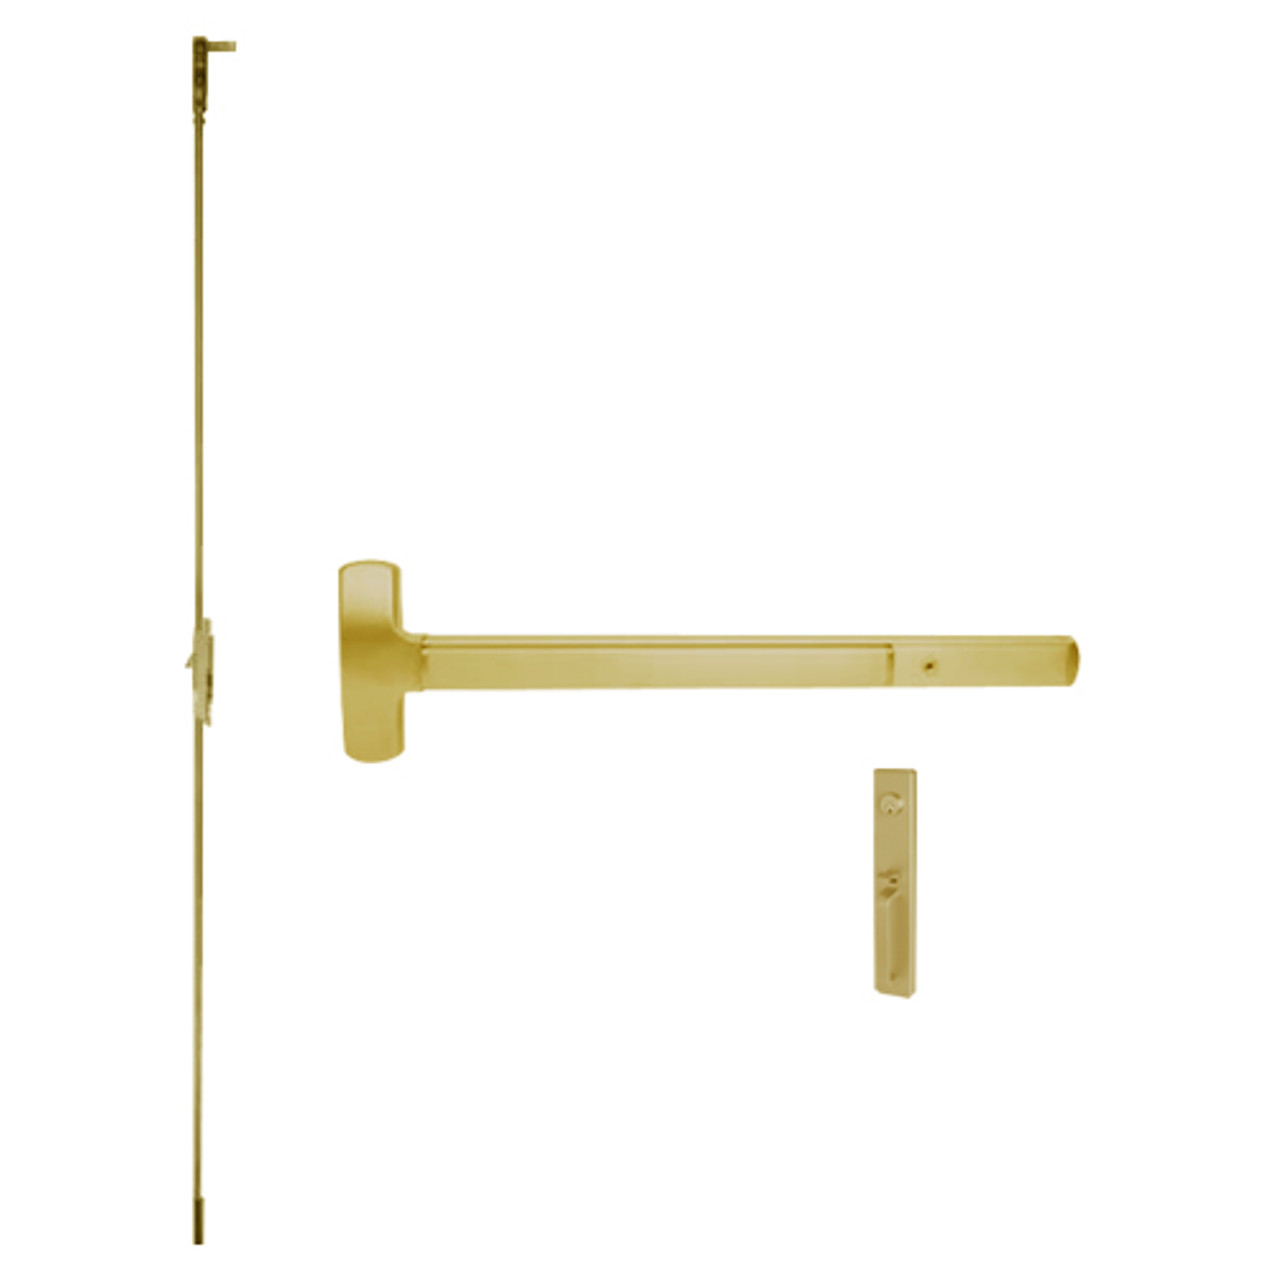 25-C-TP-US4-3 Falcon Exit Device in Satin Brass